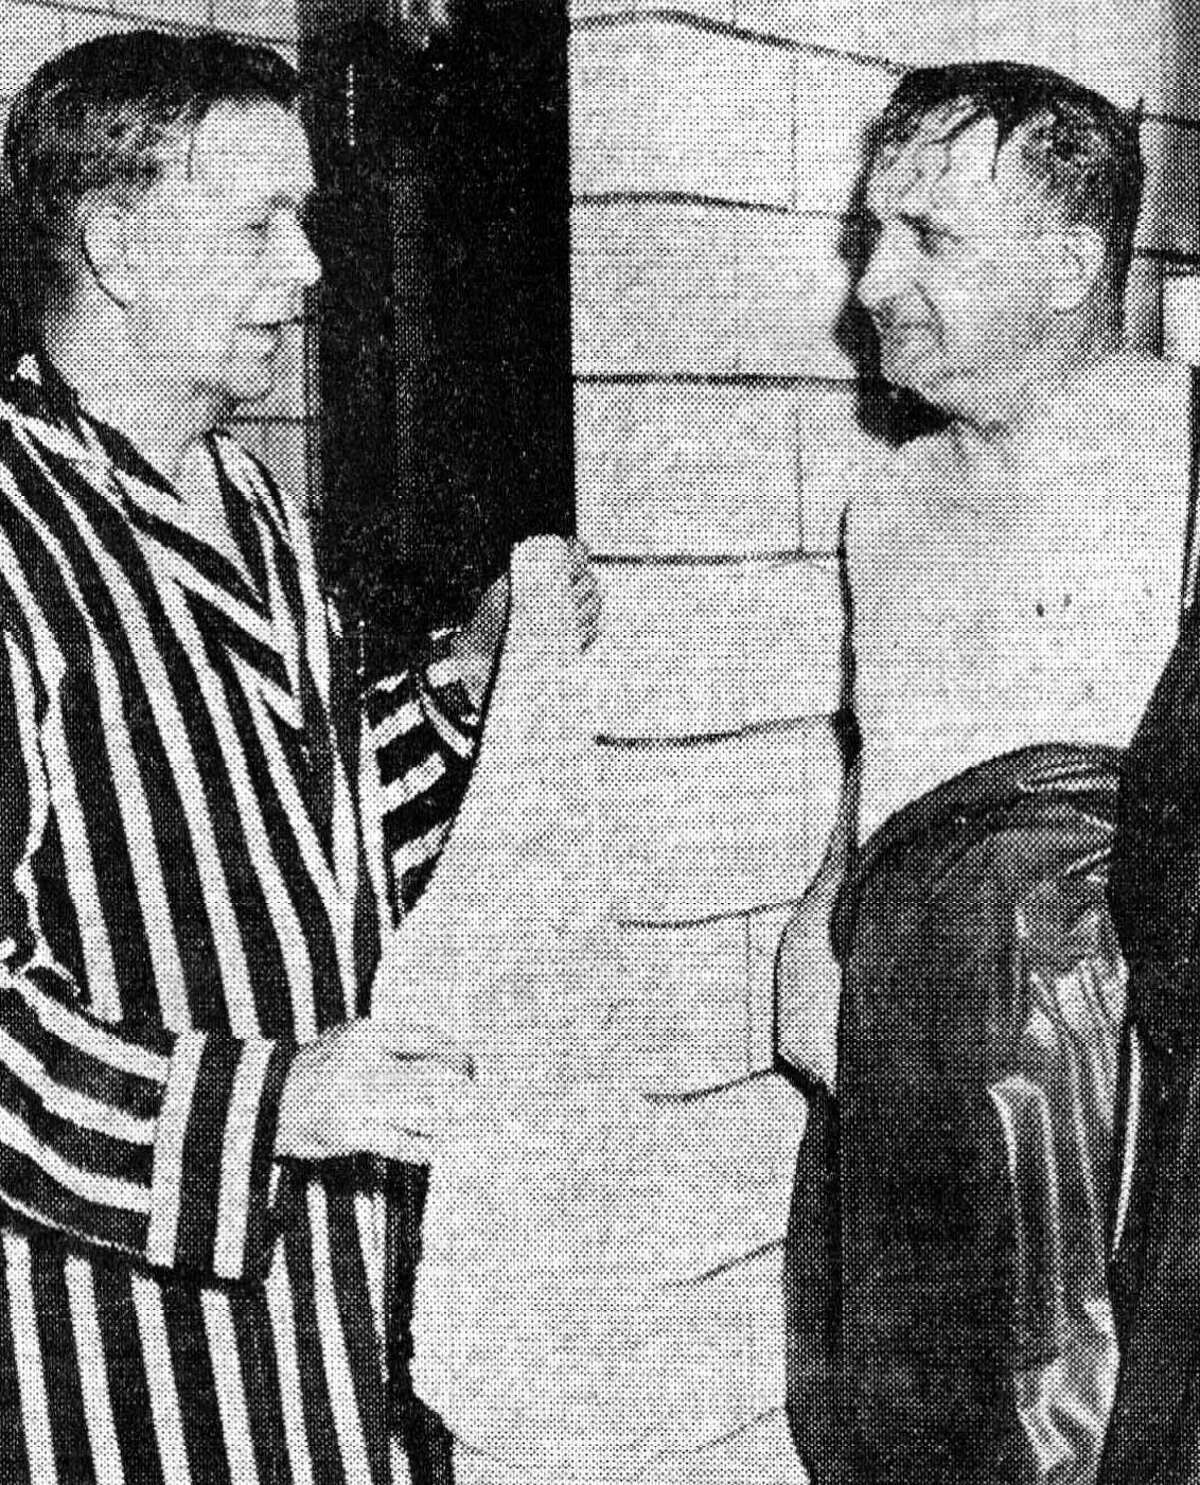 Harold Walsh (left) in charge of the men’s brine bathroom at Mercy Community-Hospital, is shown chatting with a bath patient emerging from a shower stall after taking a bath in brine in the late summer of 1956. 